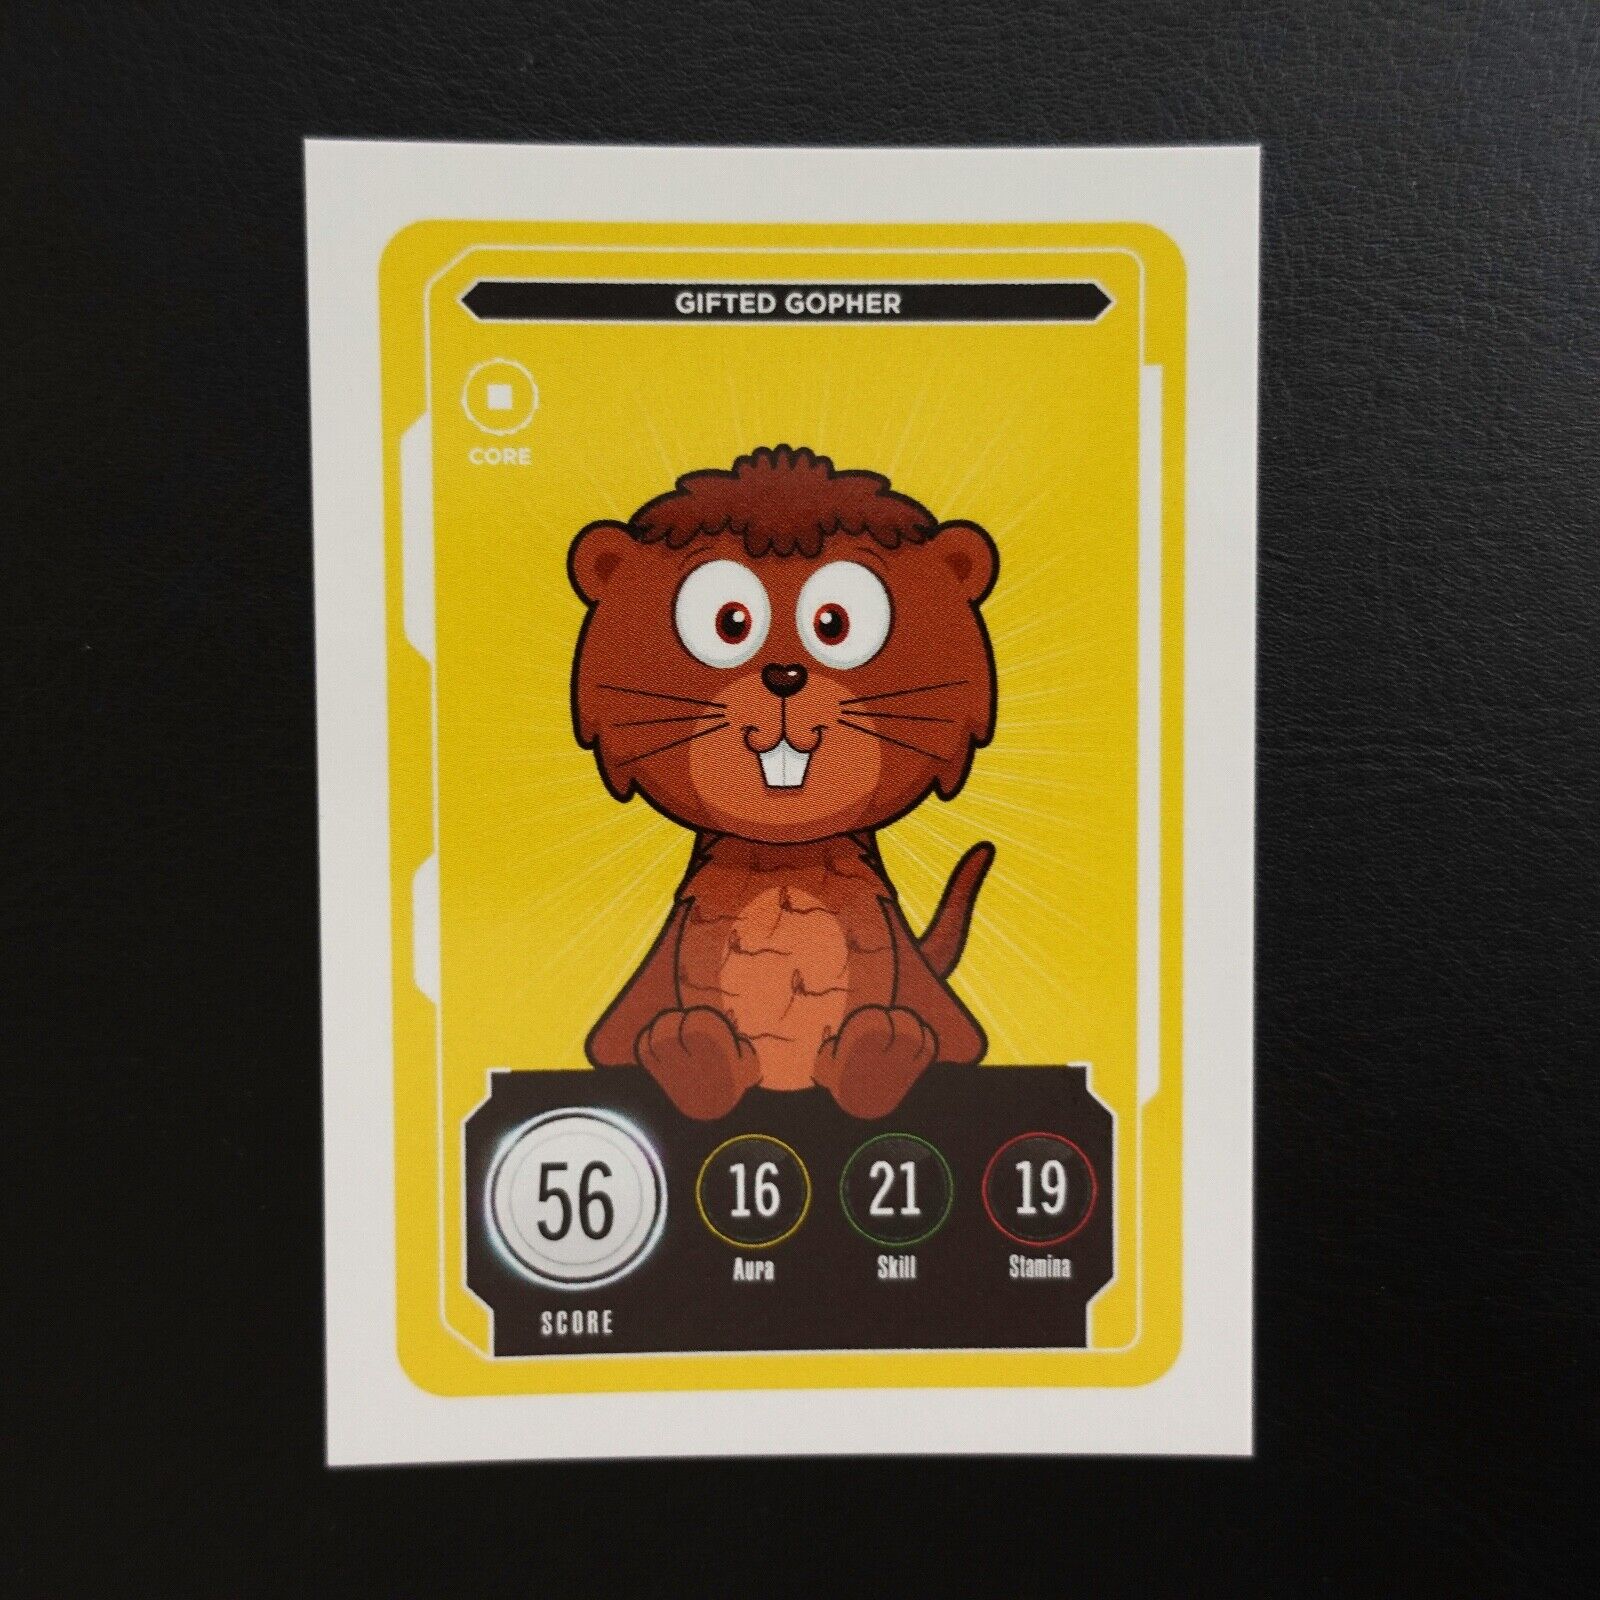 Gifted Gopher Veefriends Compete And Collect Series 2 Trading Card Gary Vee